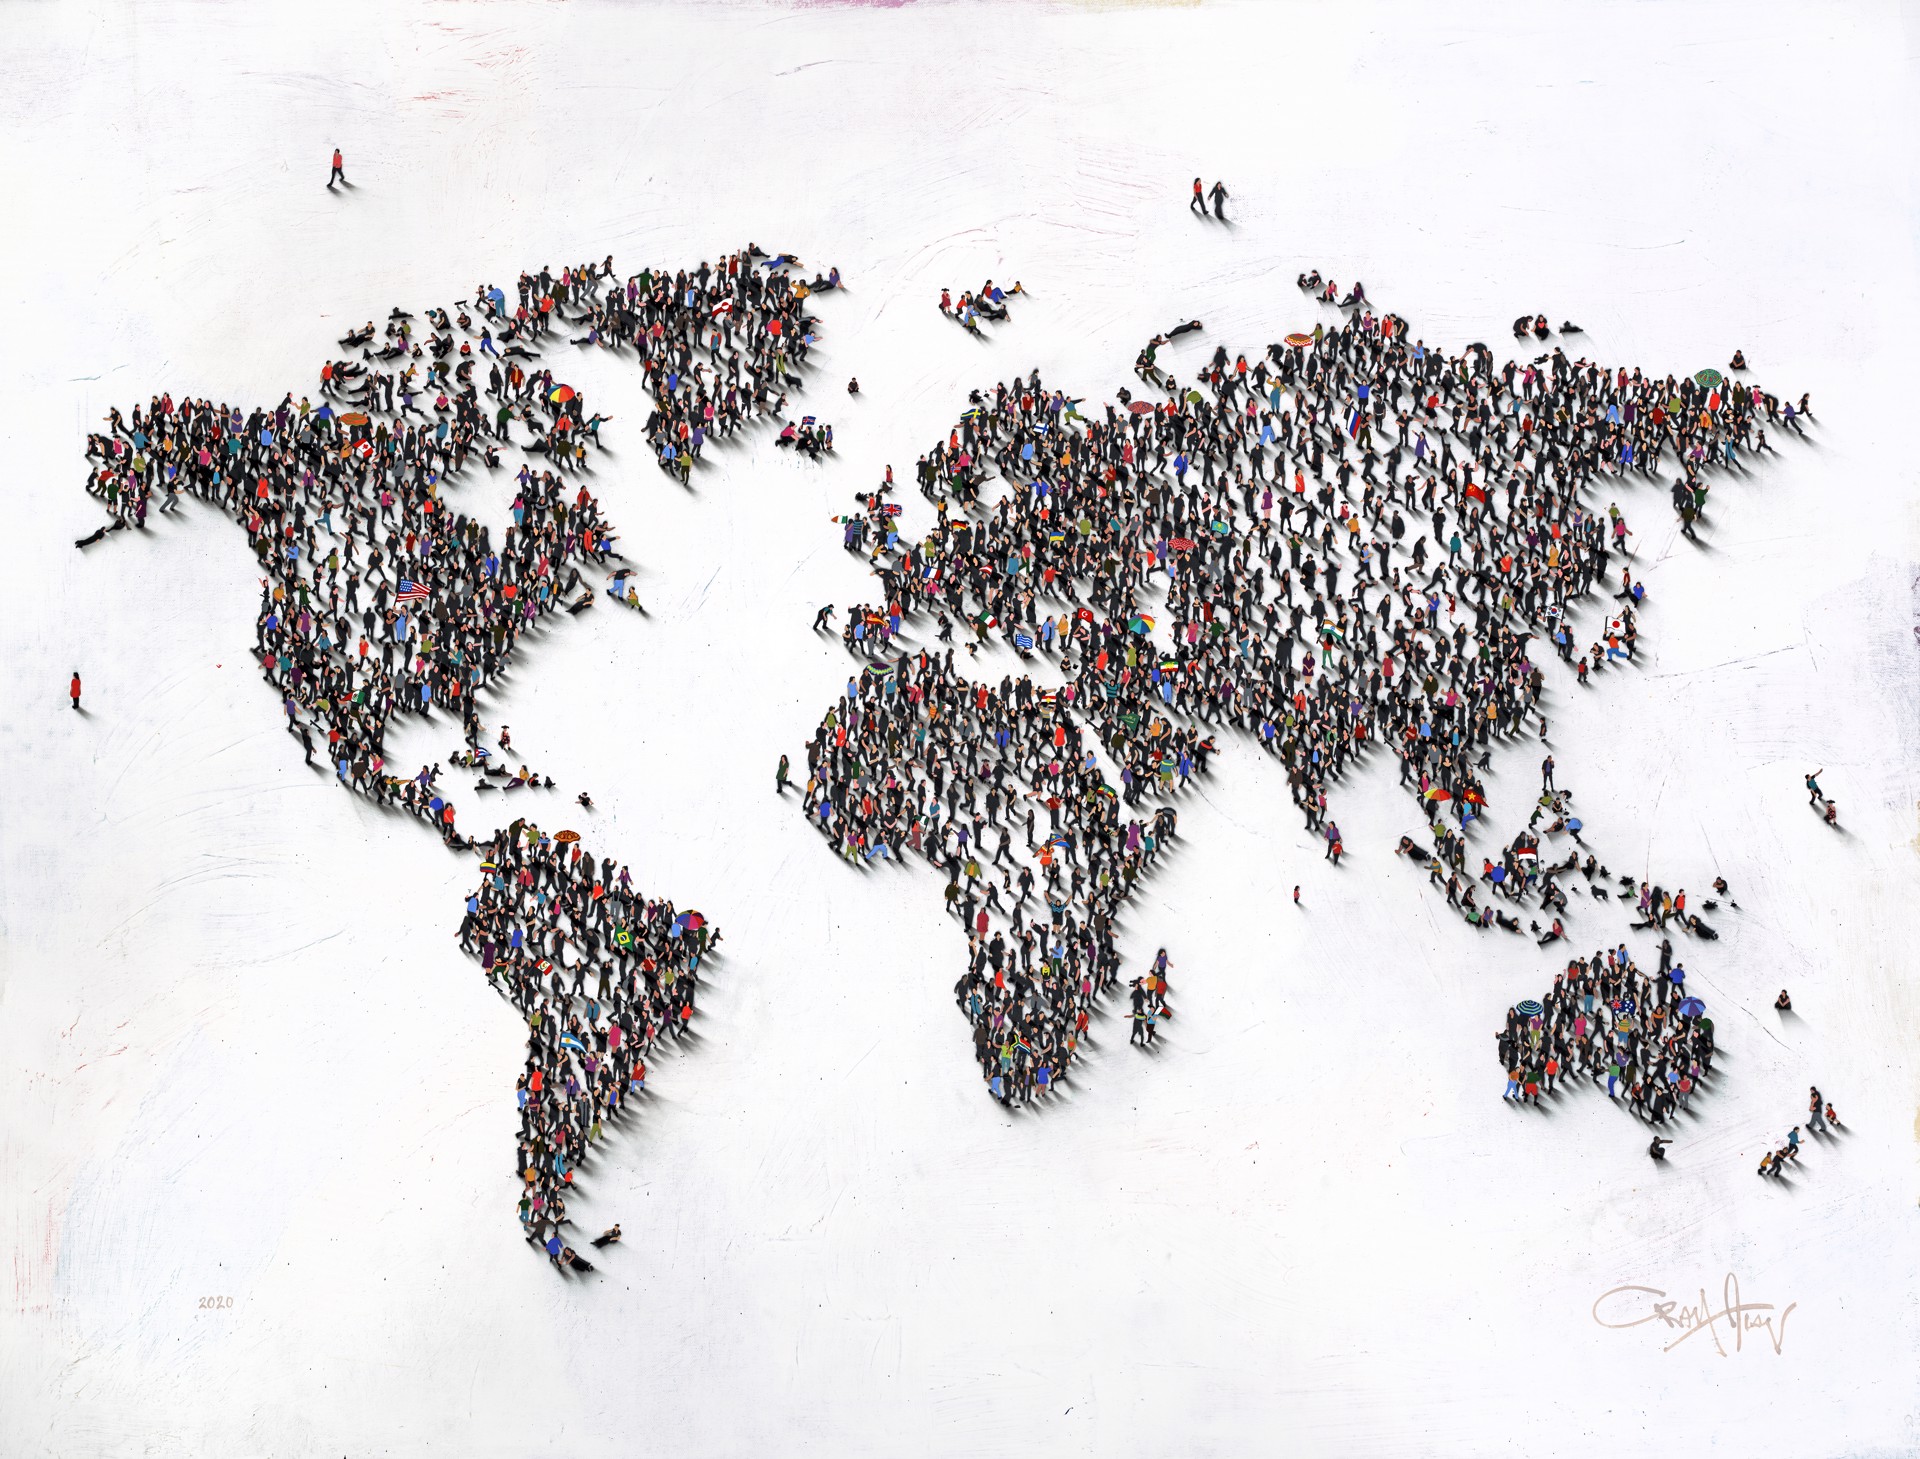 Global Family by Craig Alan, Populus Conceptual